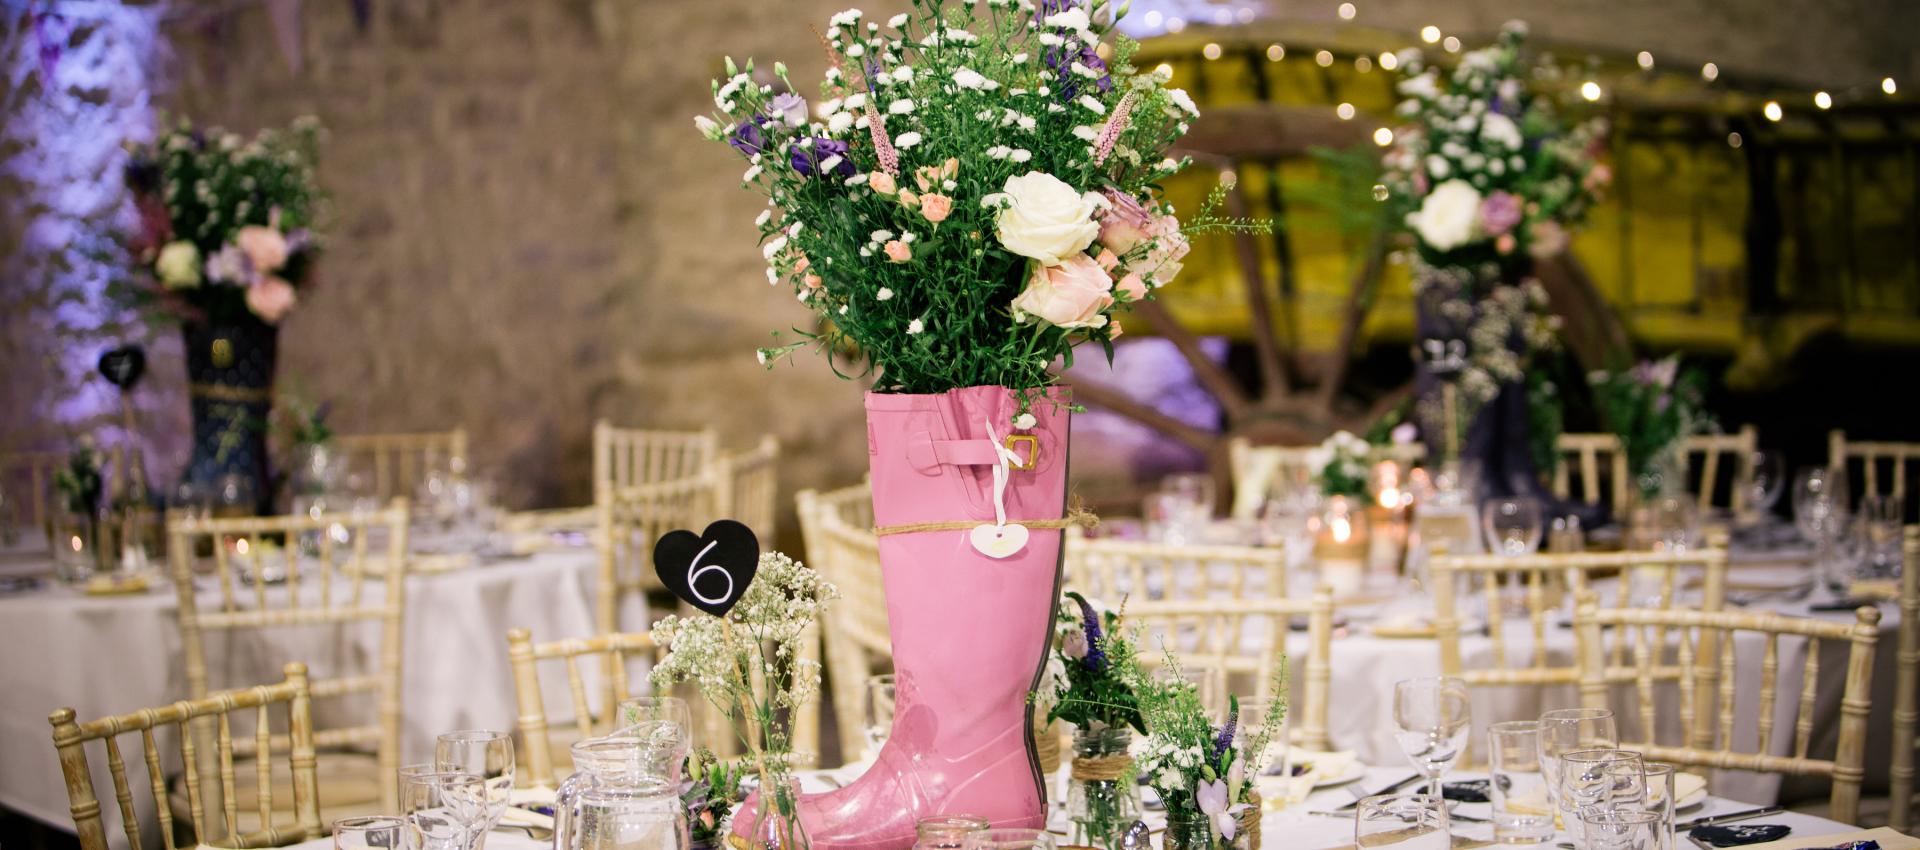 wedding table with pink wellie as flower vase